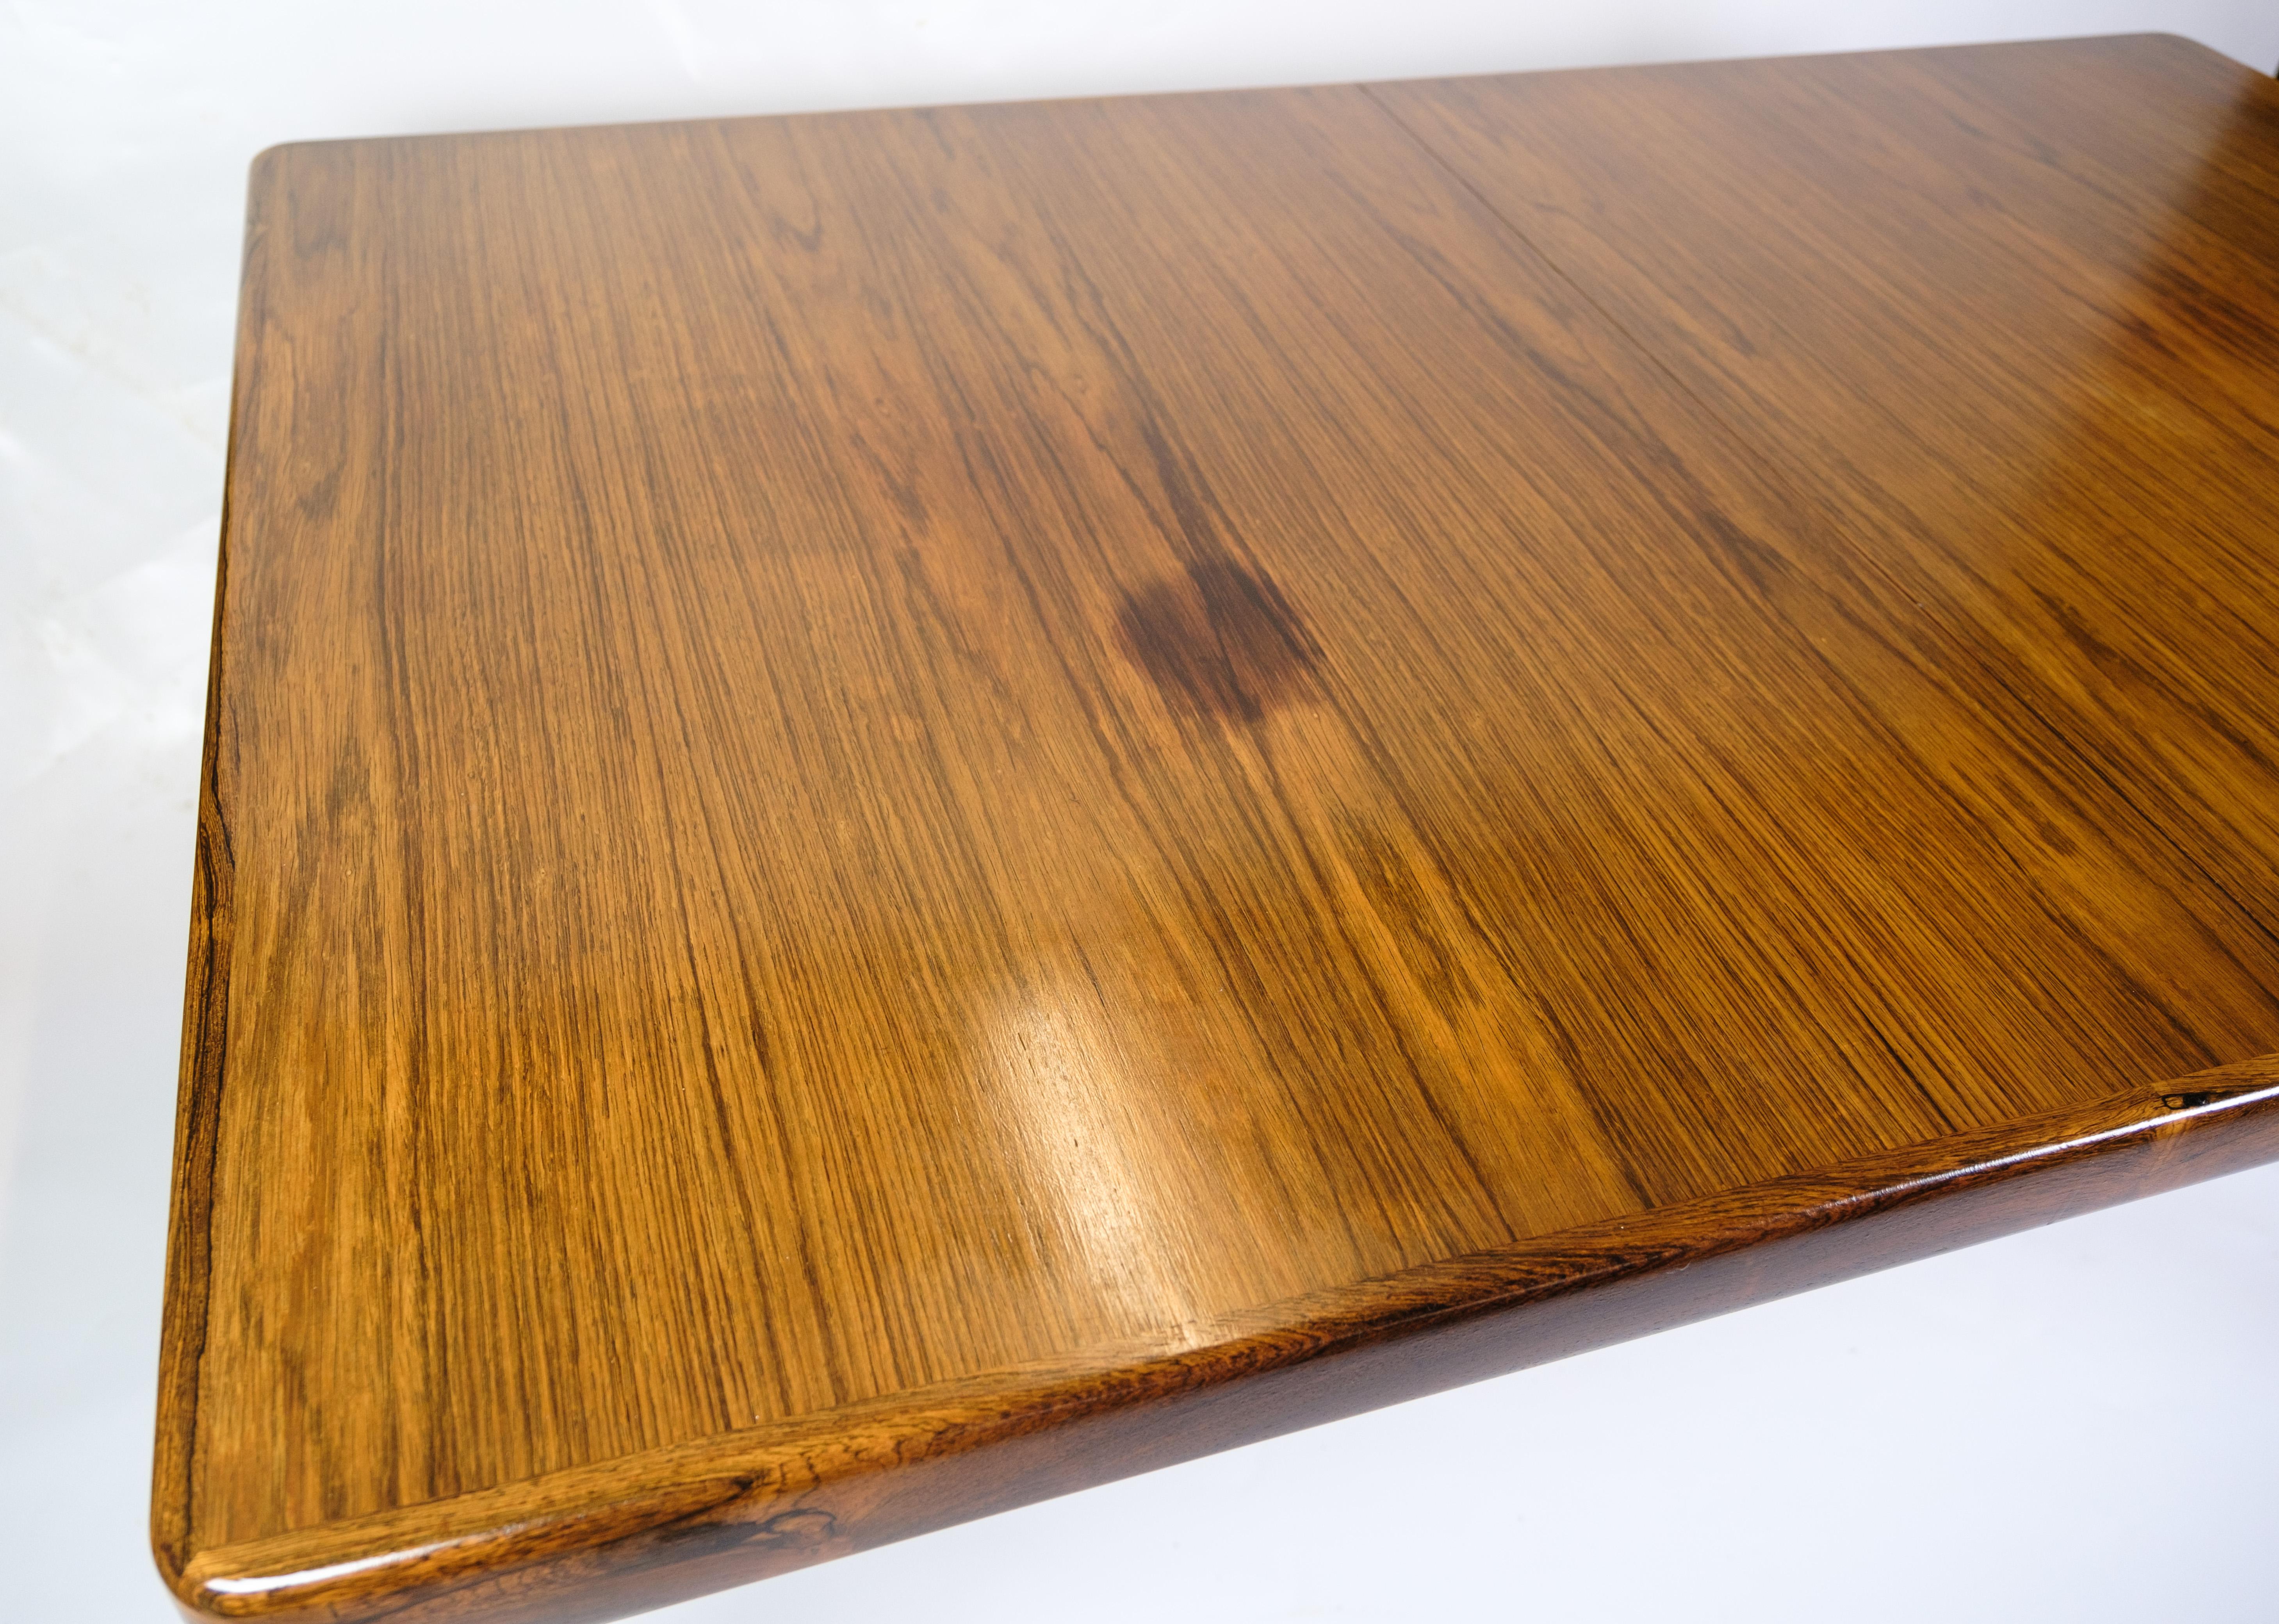 Mid-Century Modern Dining Table Made In Rosewood By Henry W. Klein Made By Bramin From 1960s